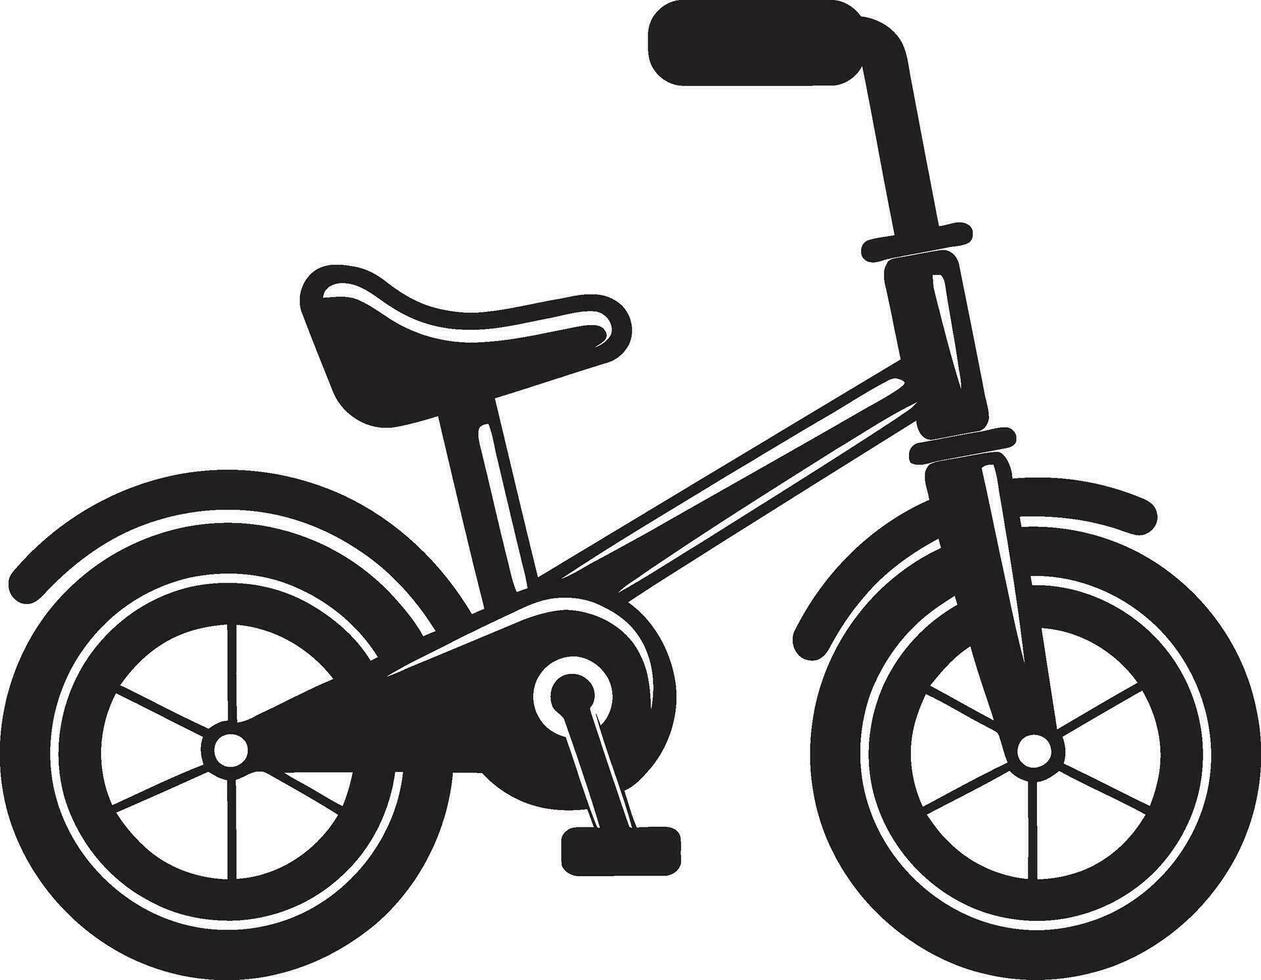 Bicycle Dreams in Digital Form Vectorized Art Bike Vector Collections A Journey in Pixels